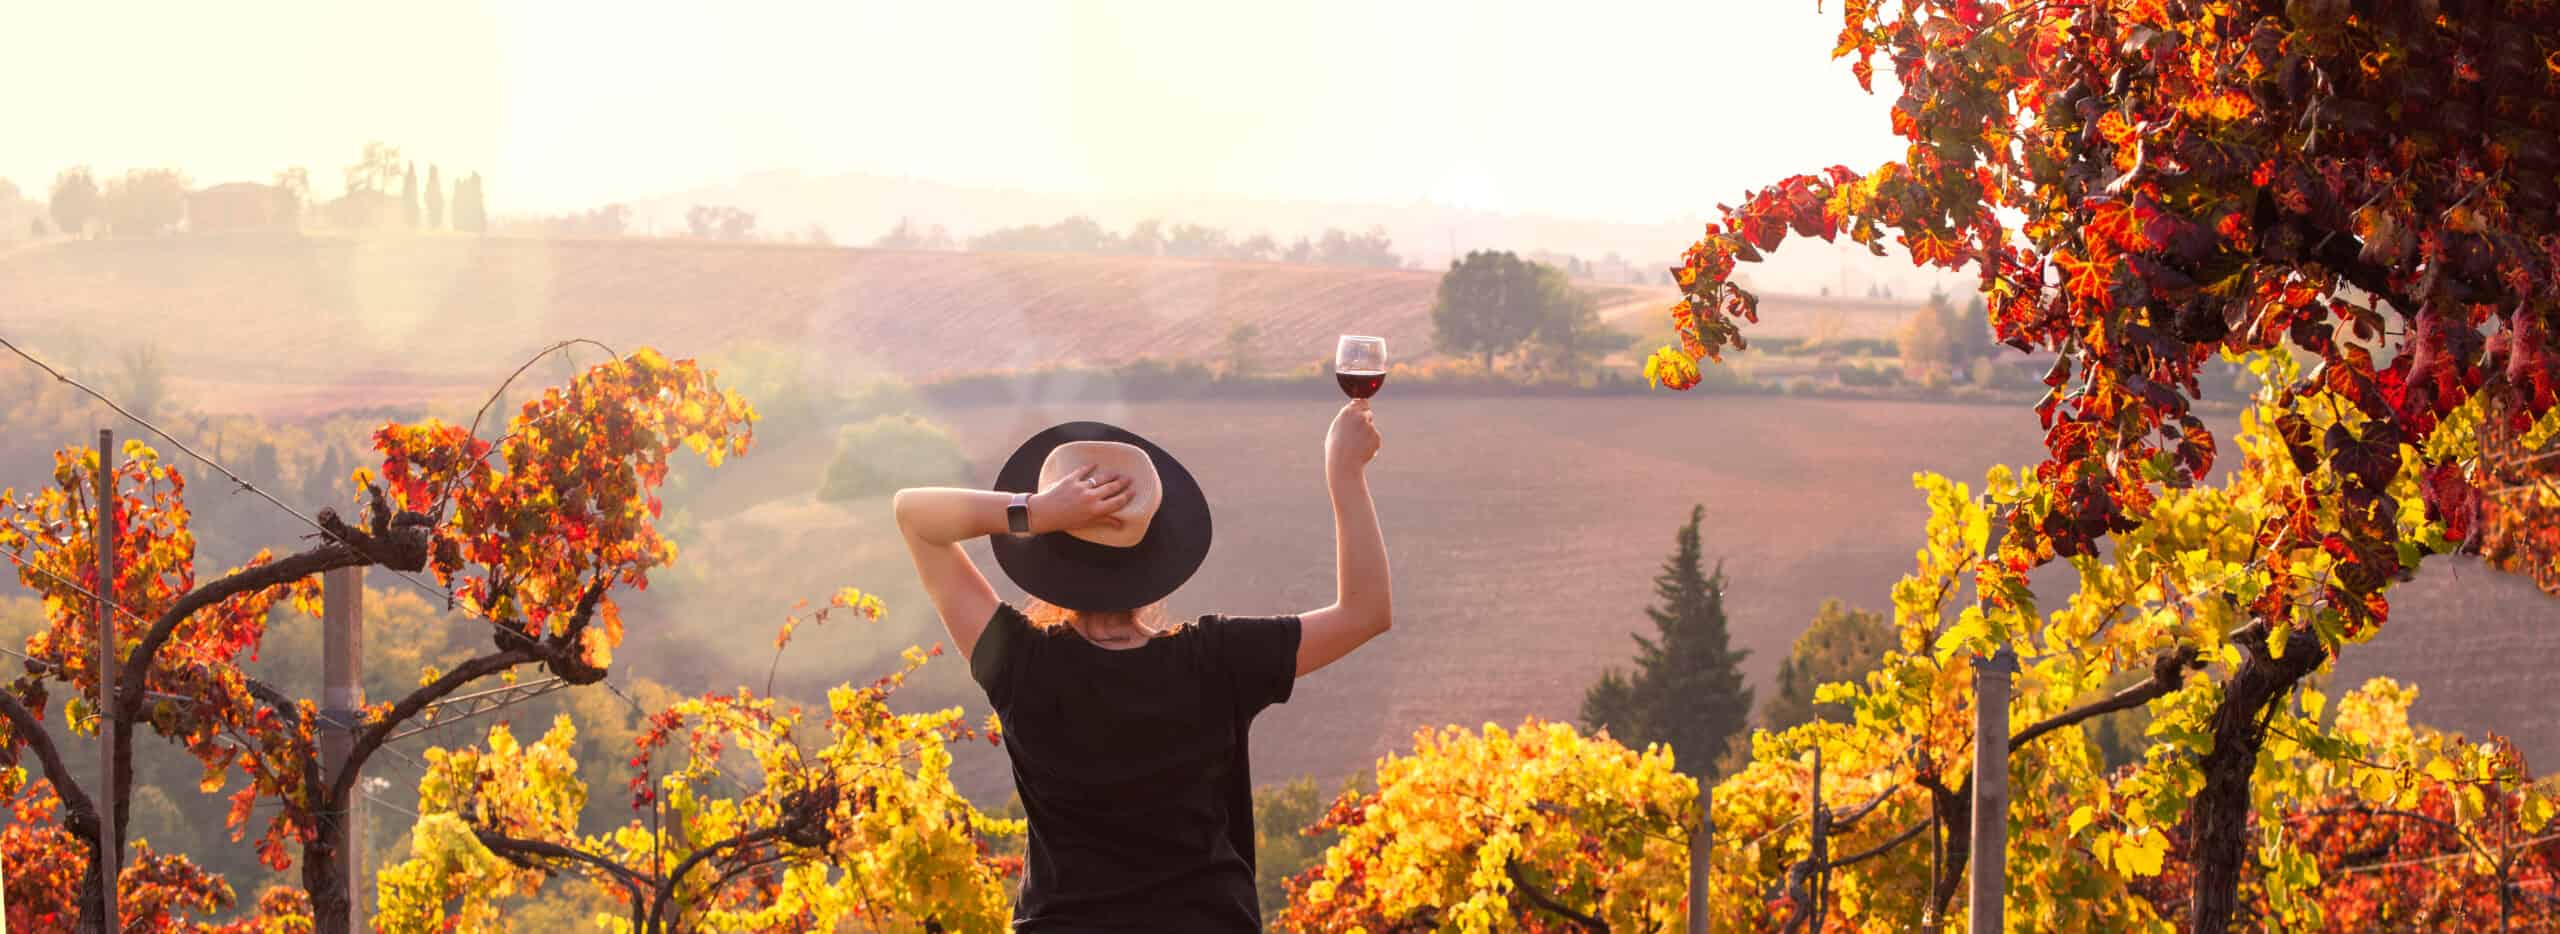 Girl in a hat at sunset and a glass of wine in hand. Nature Italy, hills and grape fields the sunlight. Glare and sun rays in the frame. Free space for text. Copy space